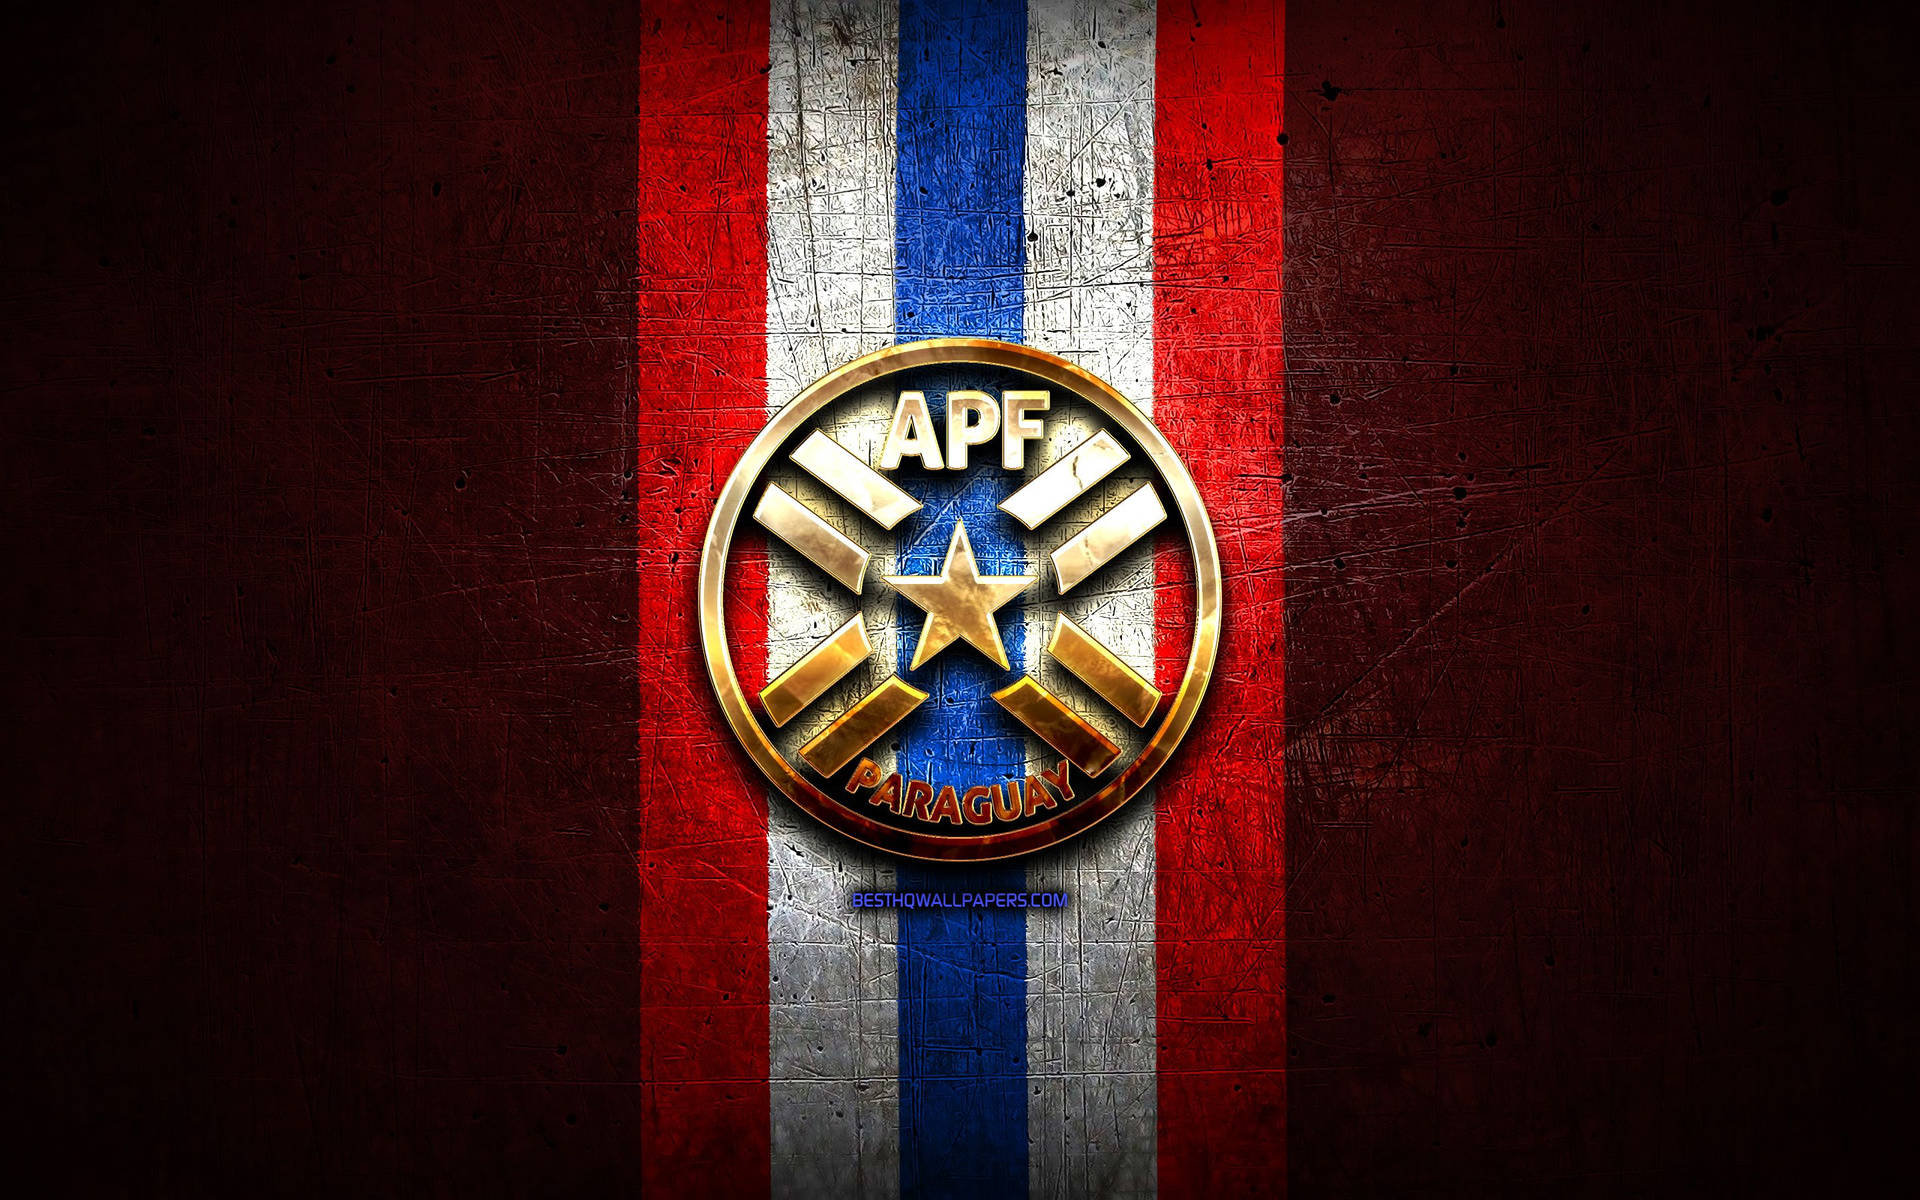 Paraguay Apf Gold Patch Background